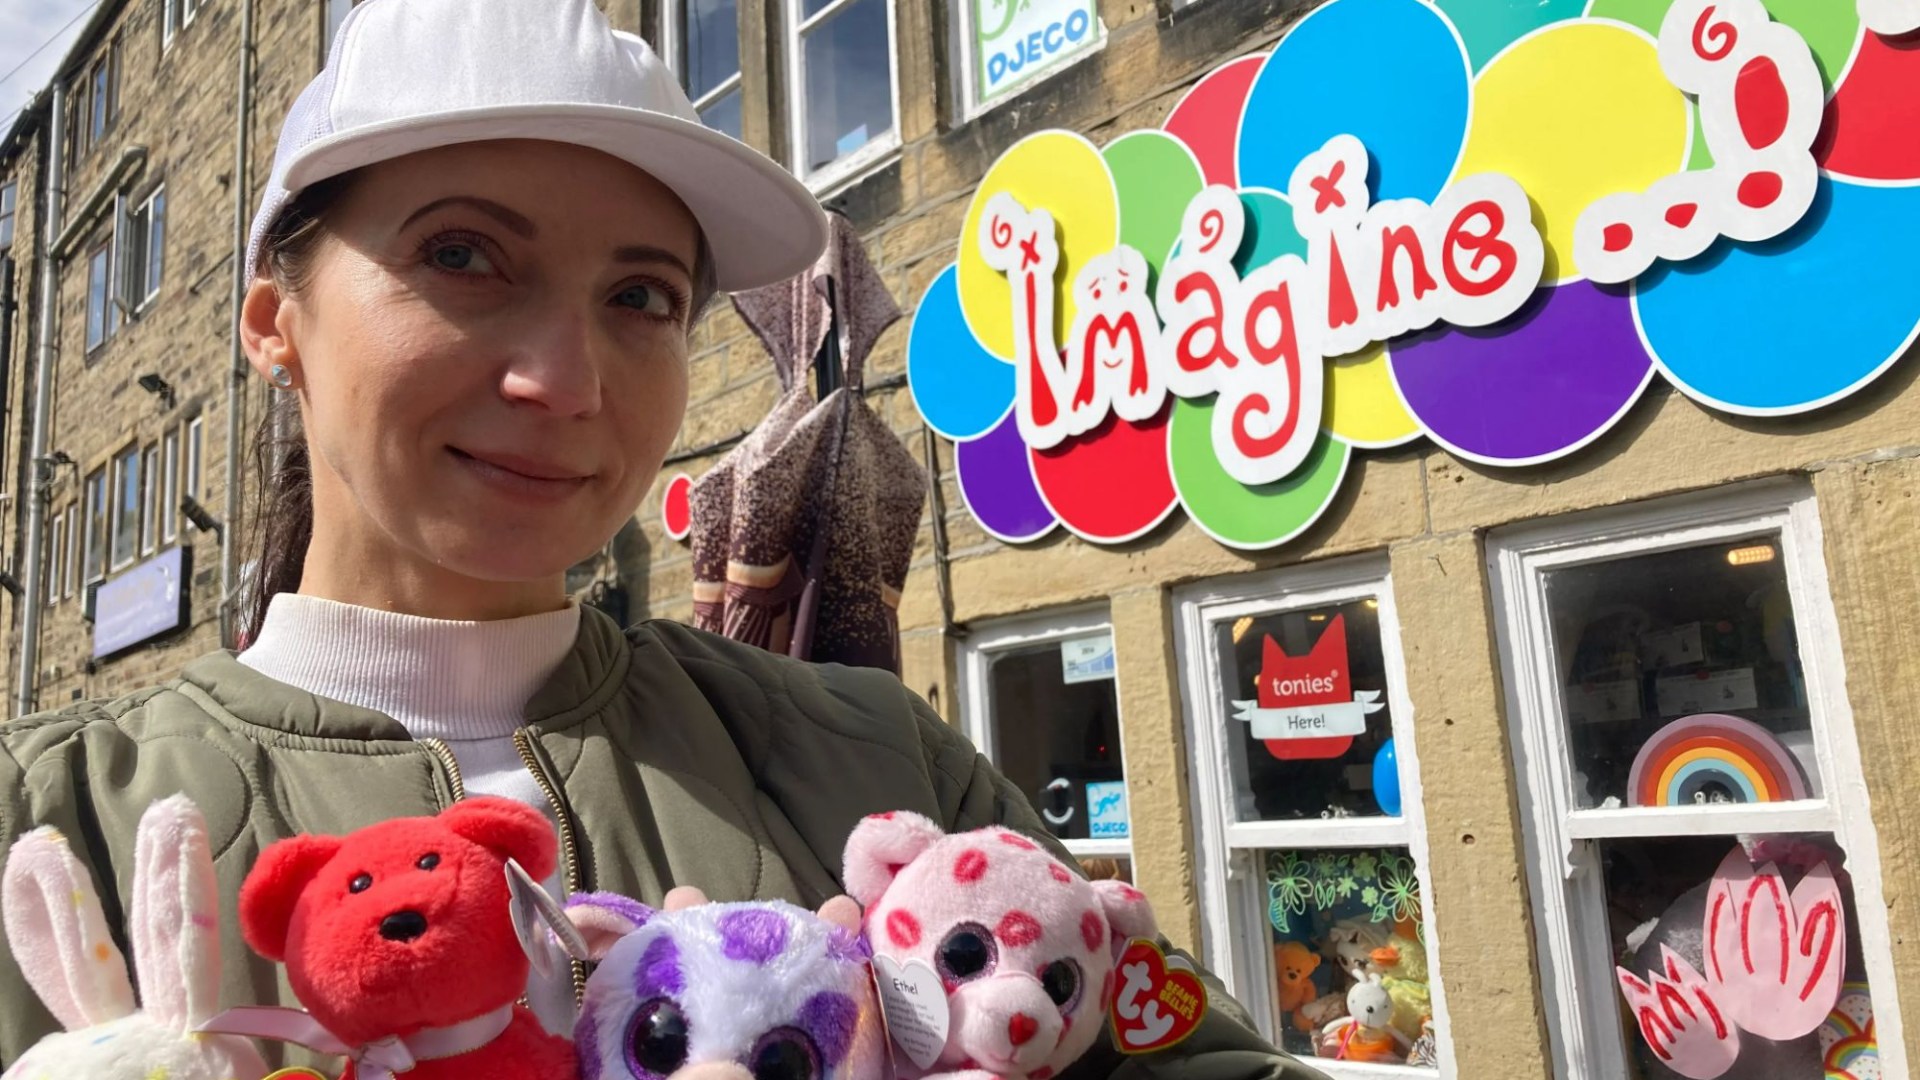 Toy shop owner left in tears as she slams online shoppers after going 20 ‘miserable’ days without taking a penny [Video]